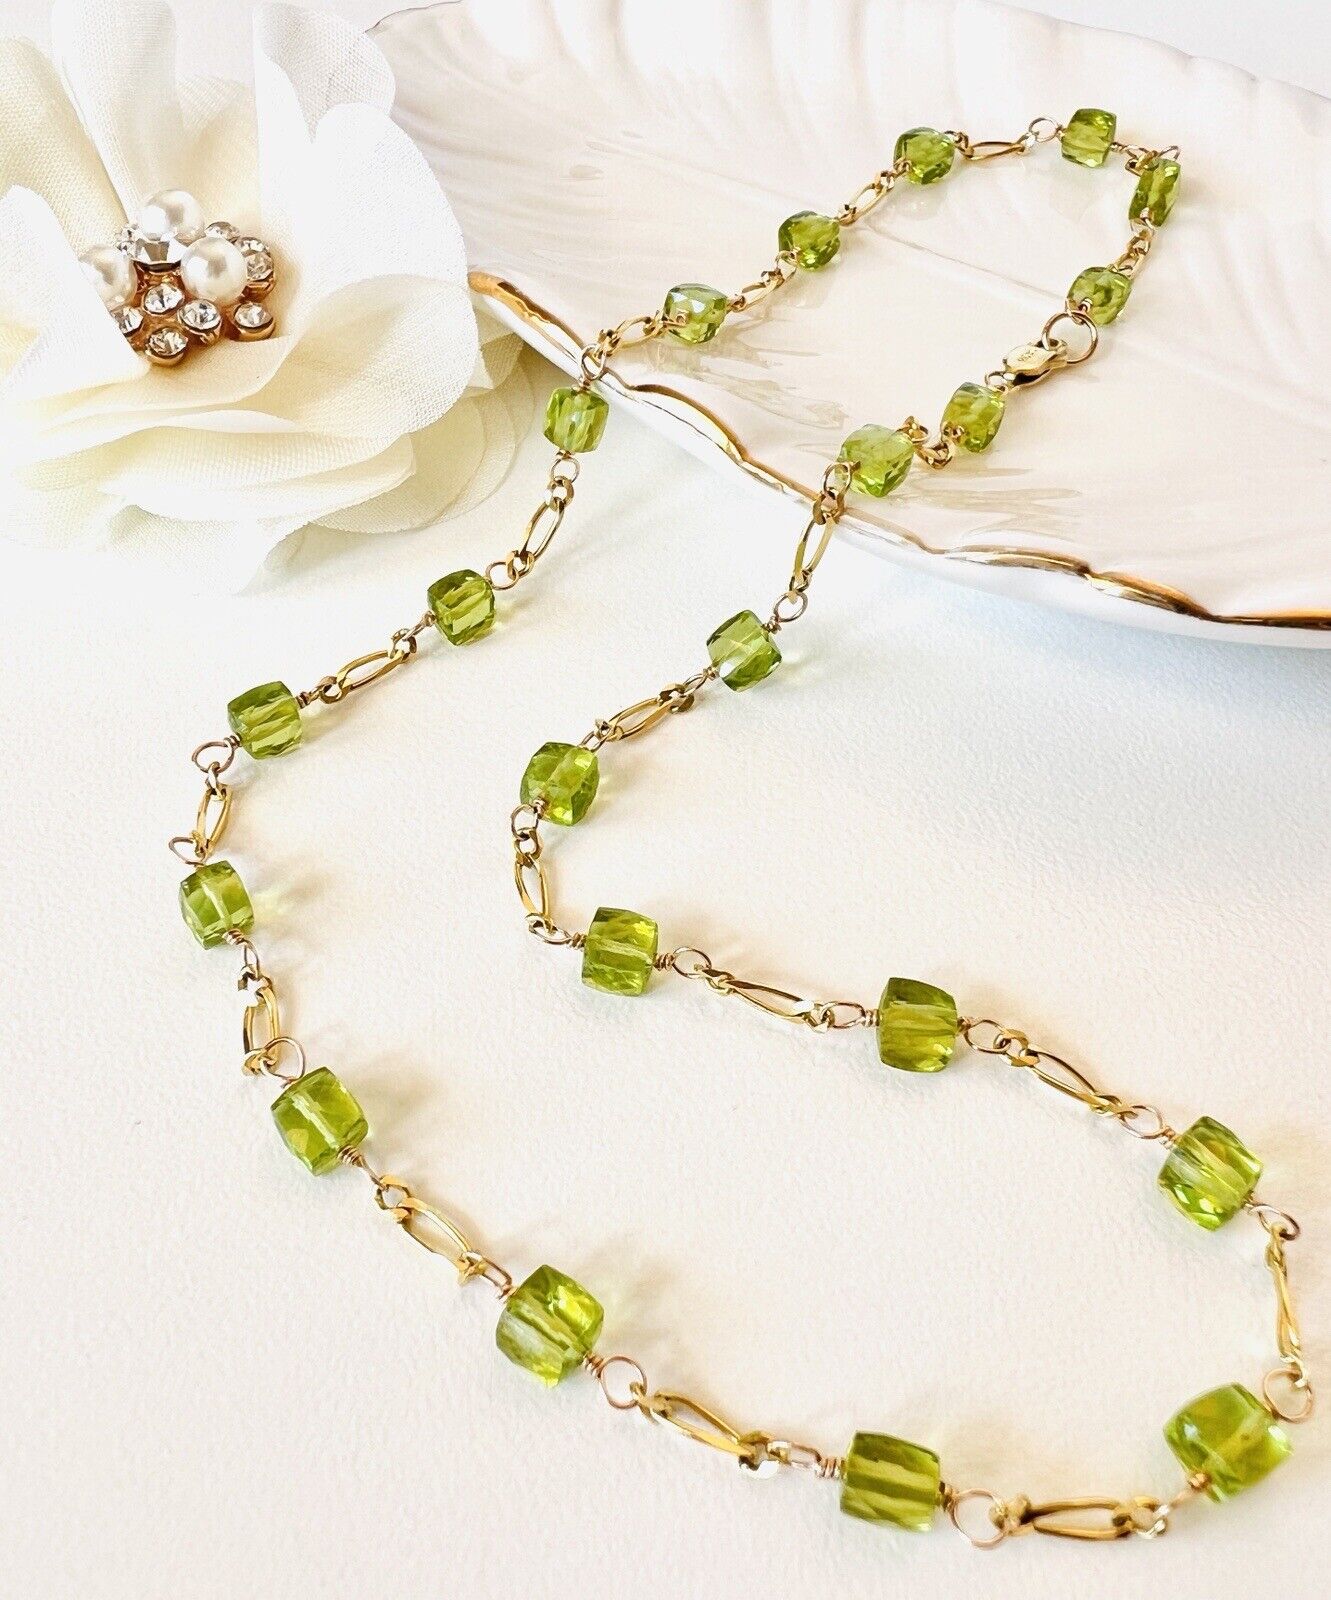 Solid 14k Yellow Gold Genuine Peridot Cube Station Chain Necklace, New 16.75”